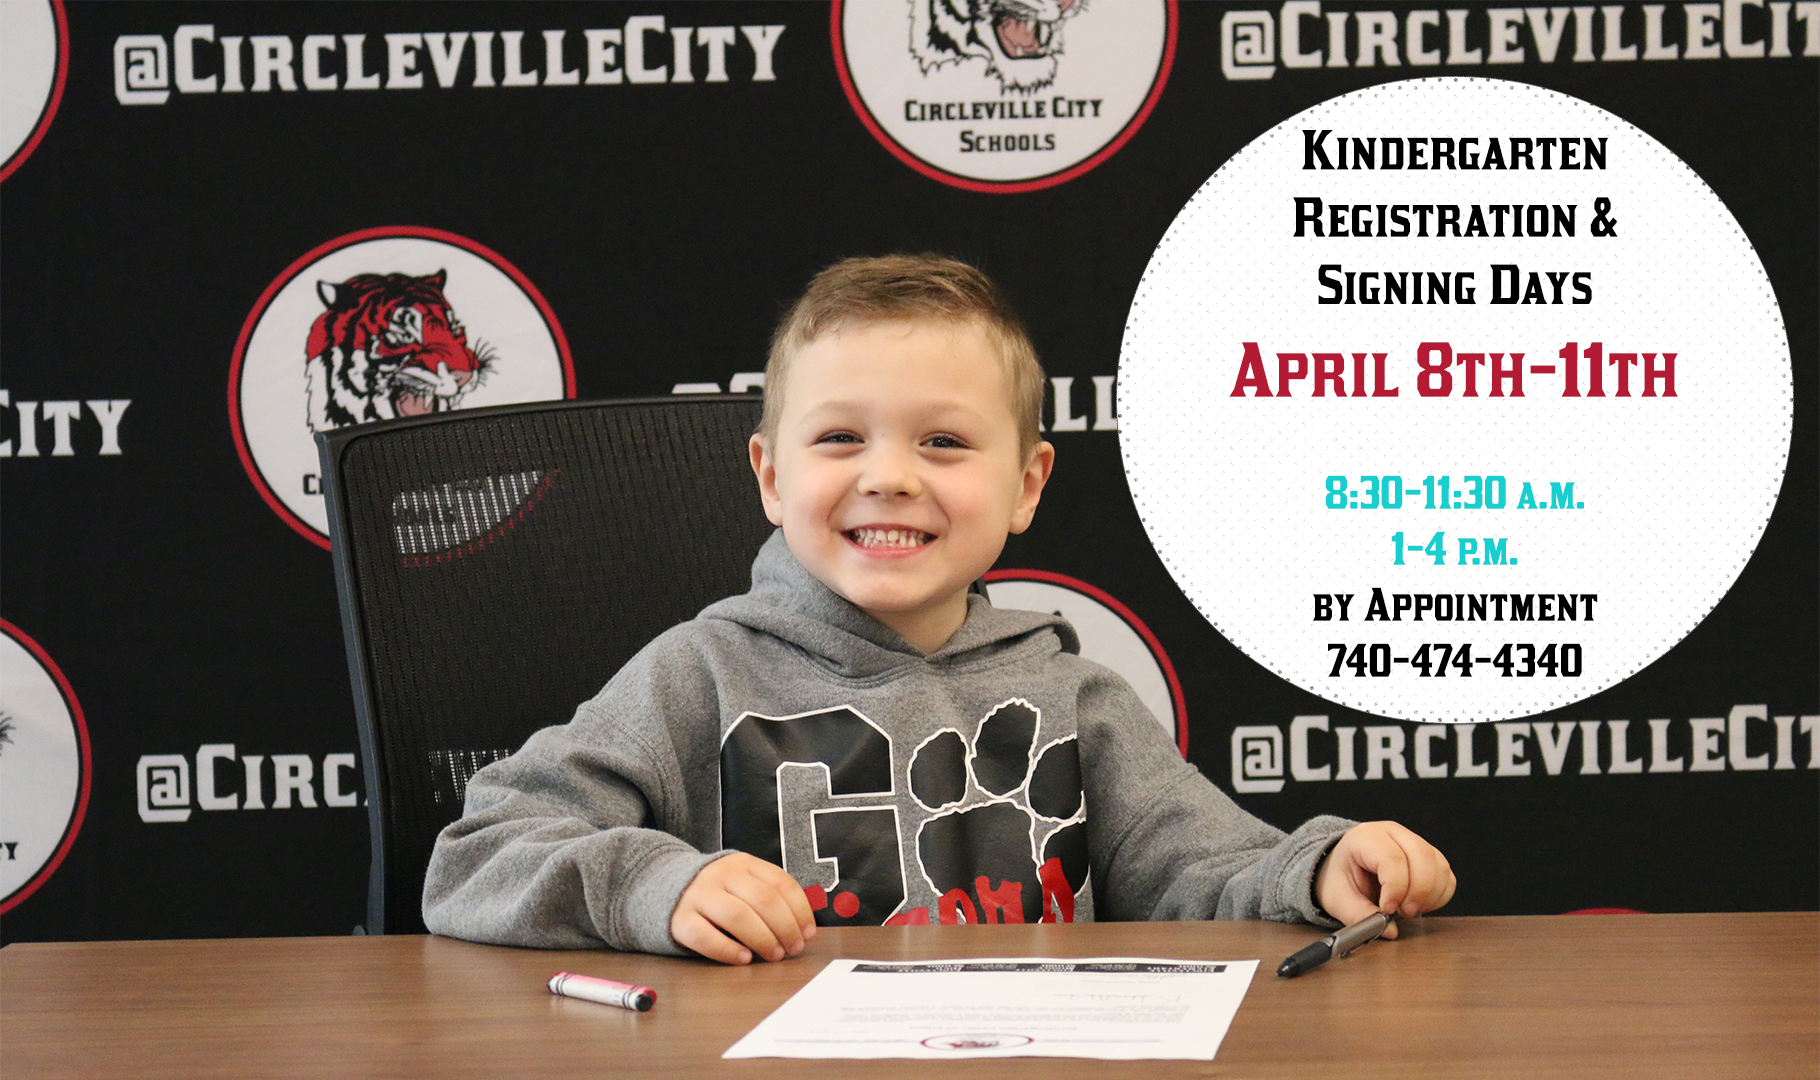 Kindergarten registration for the 2019-2020 school year will take place April 8th-11th on campus.